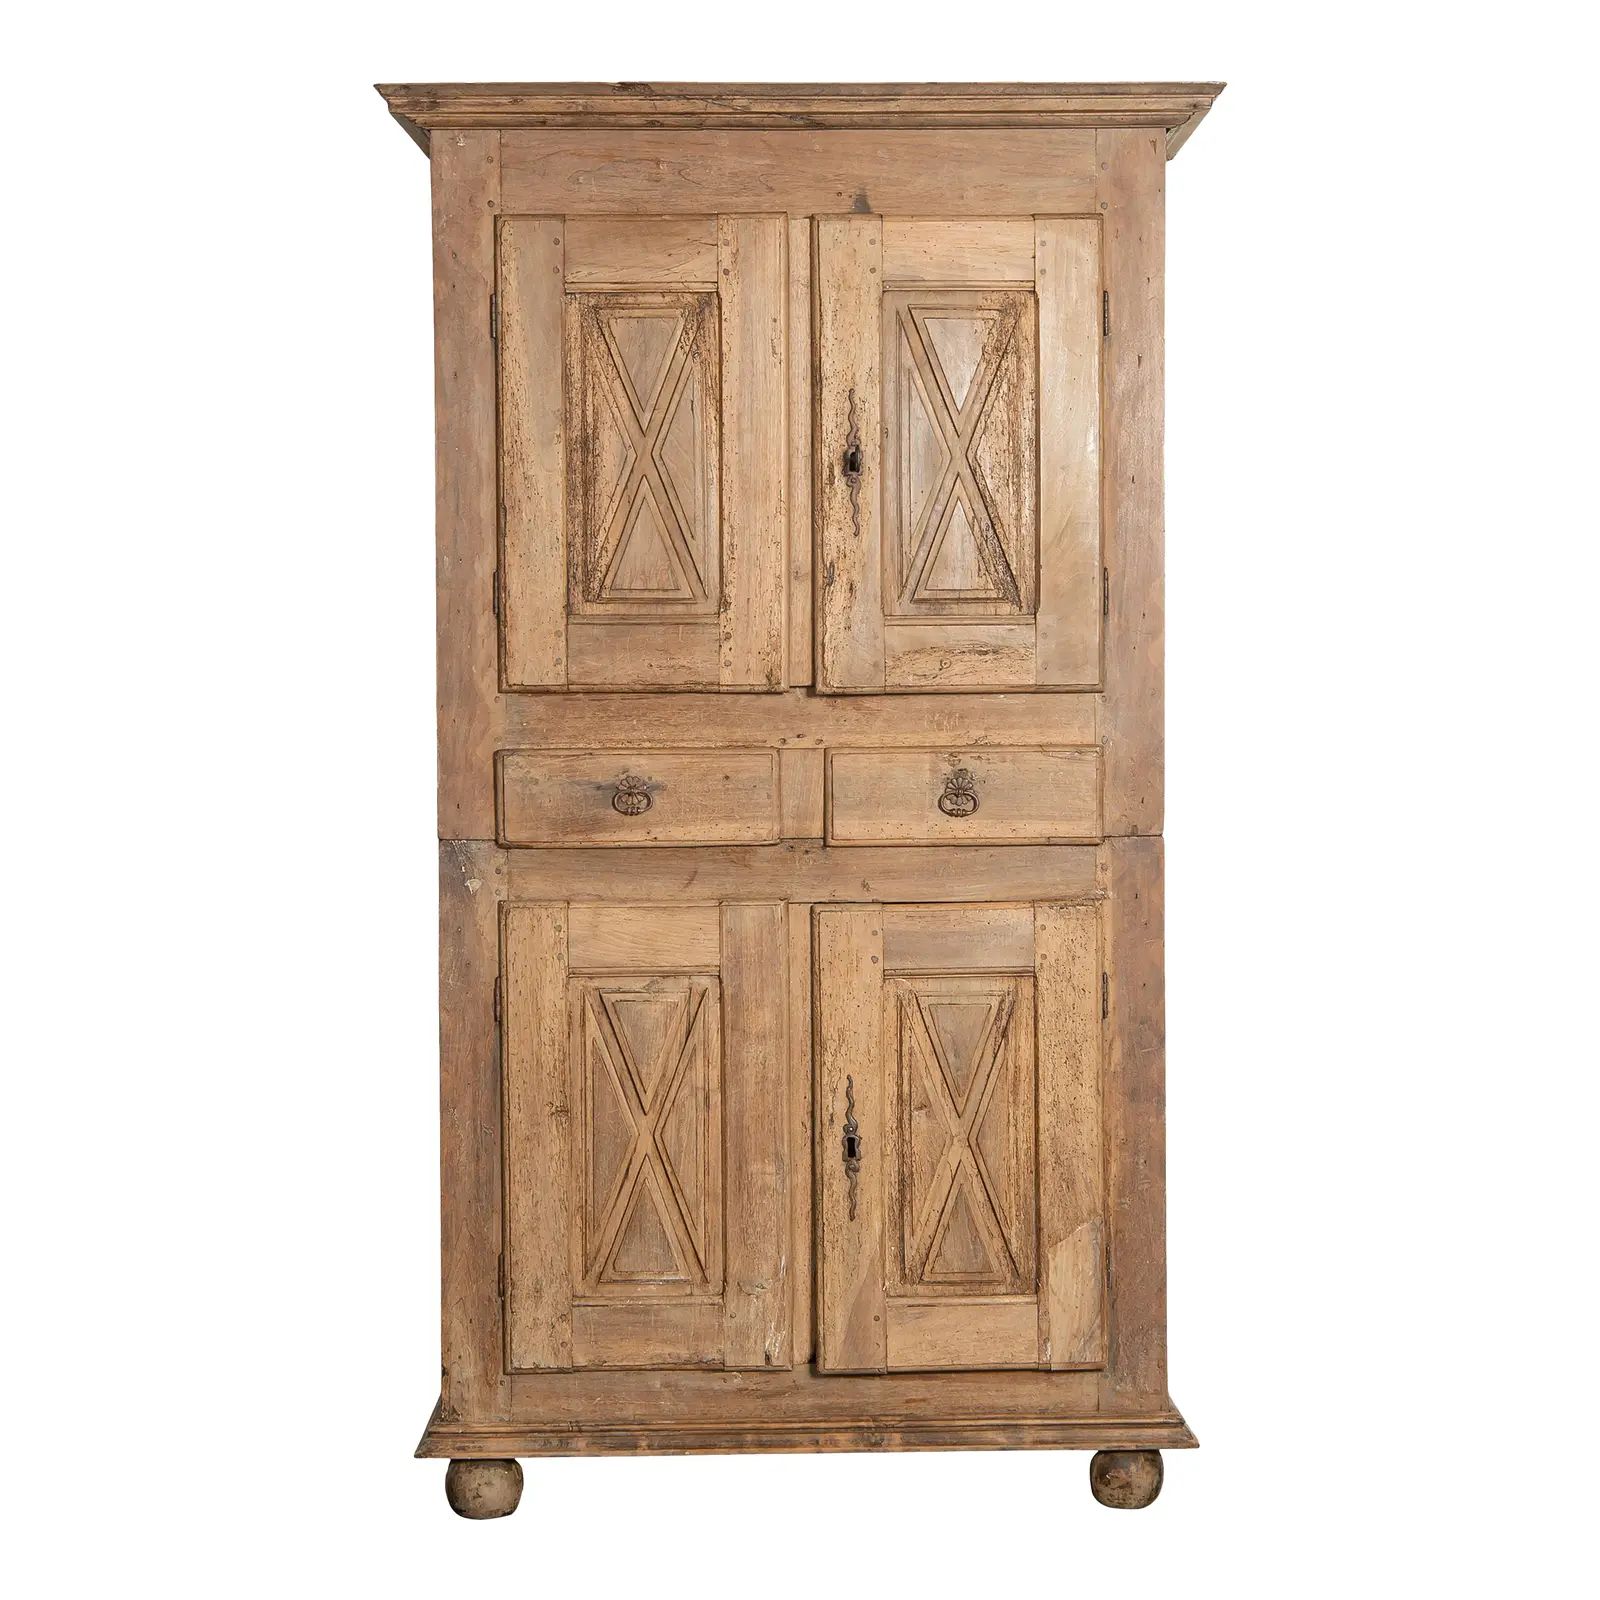 Antique French Wood Cabinet | Chairish